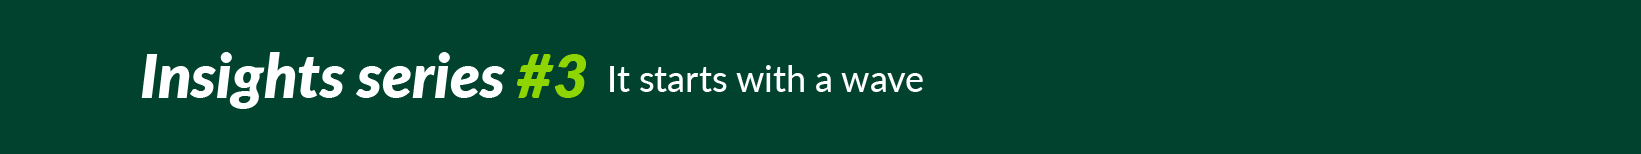 Insights series #3: It starts with a wave